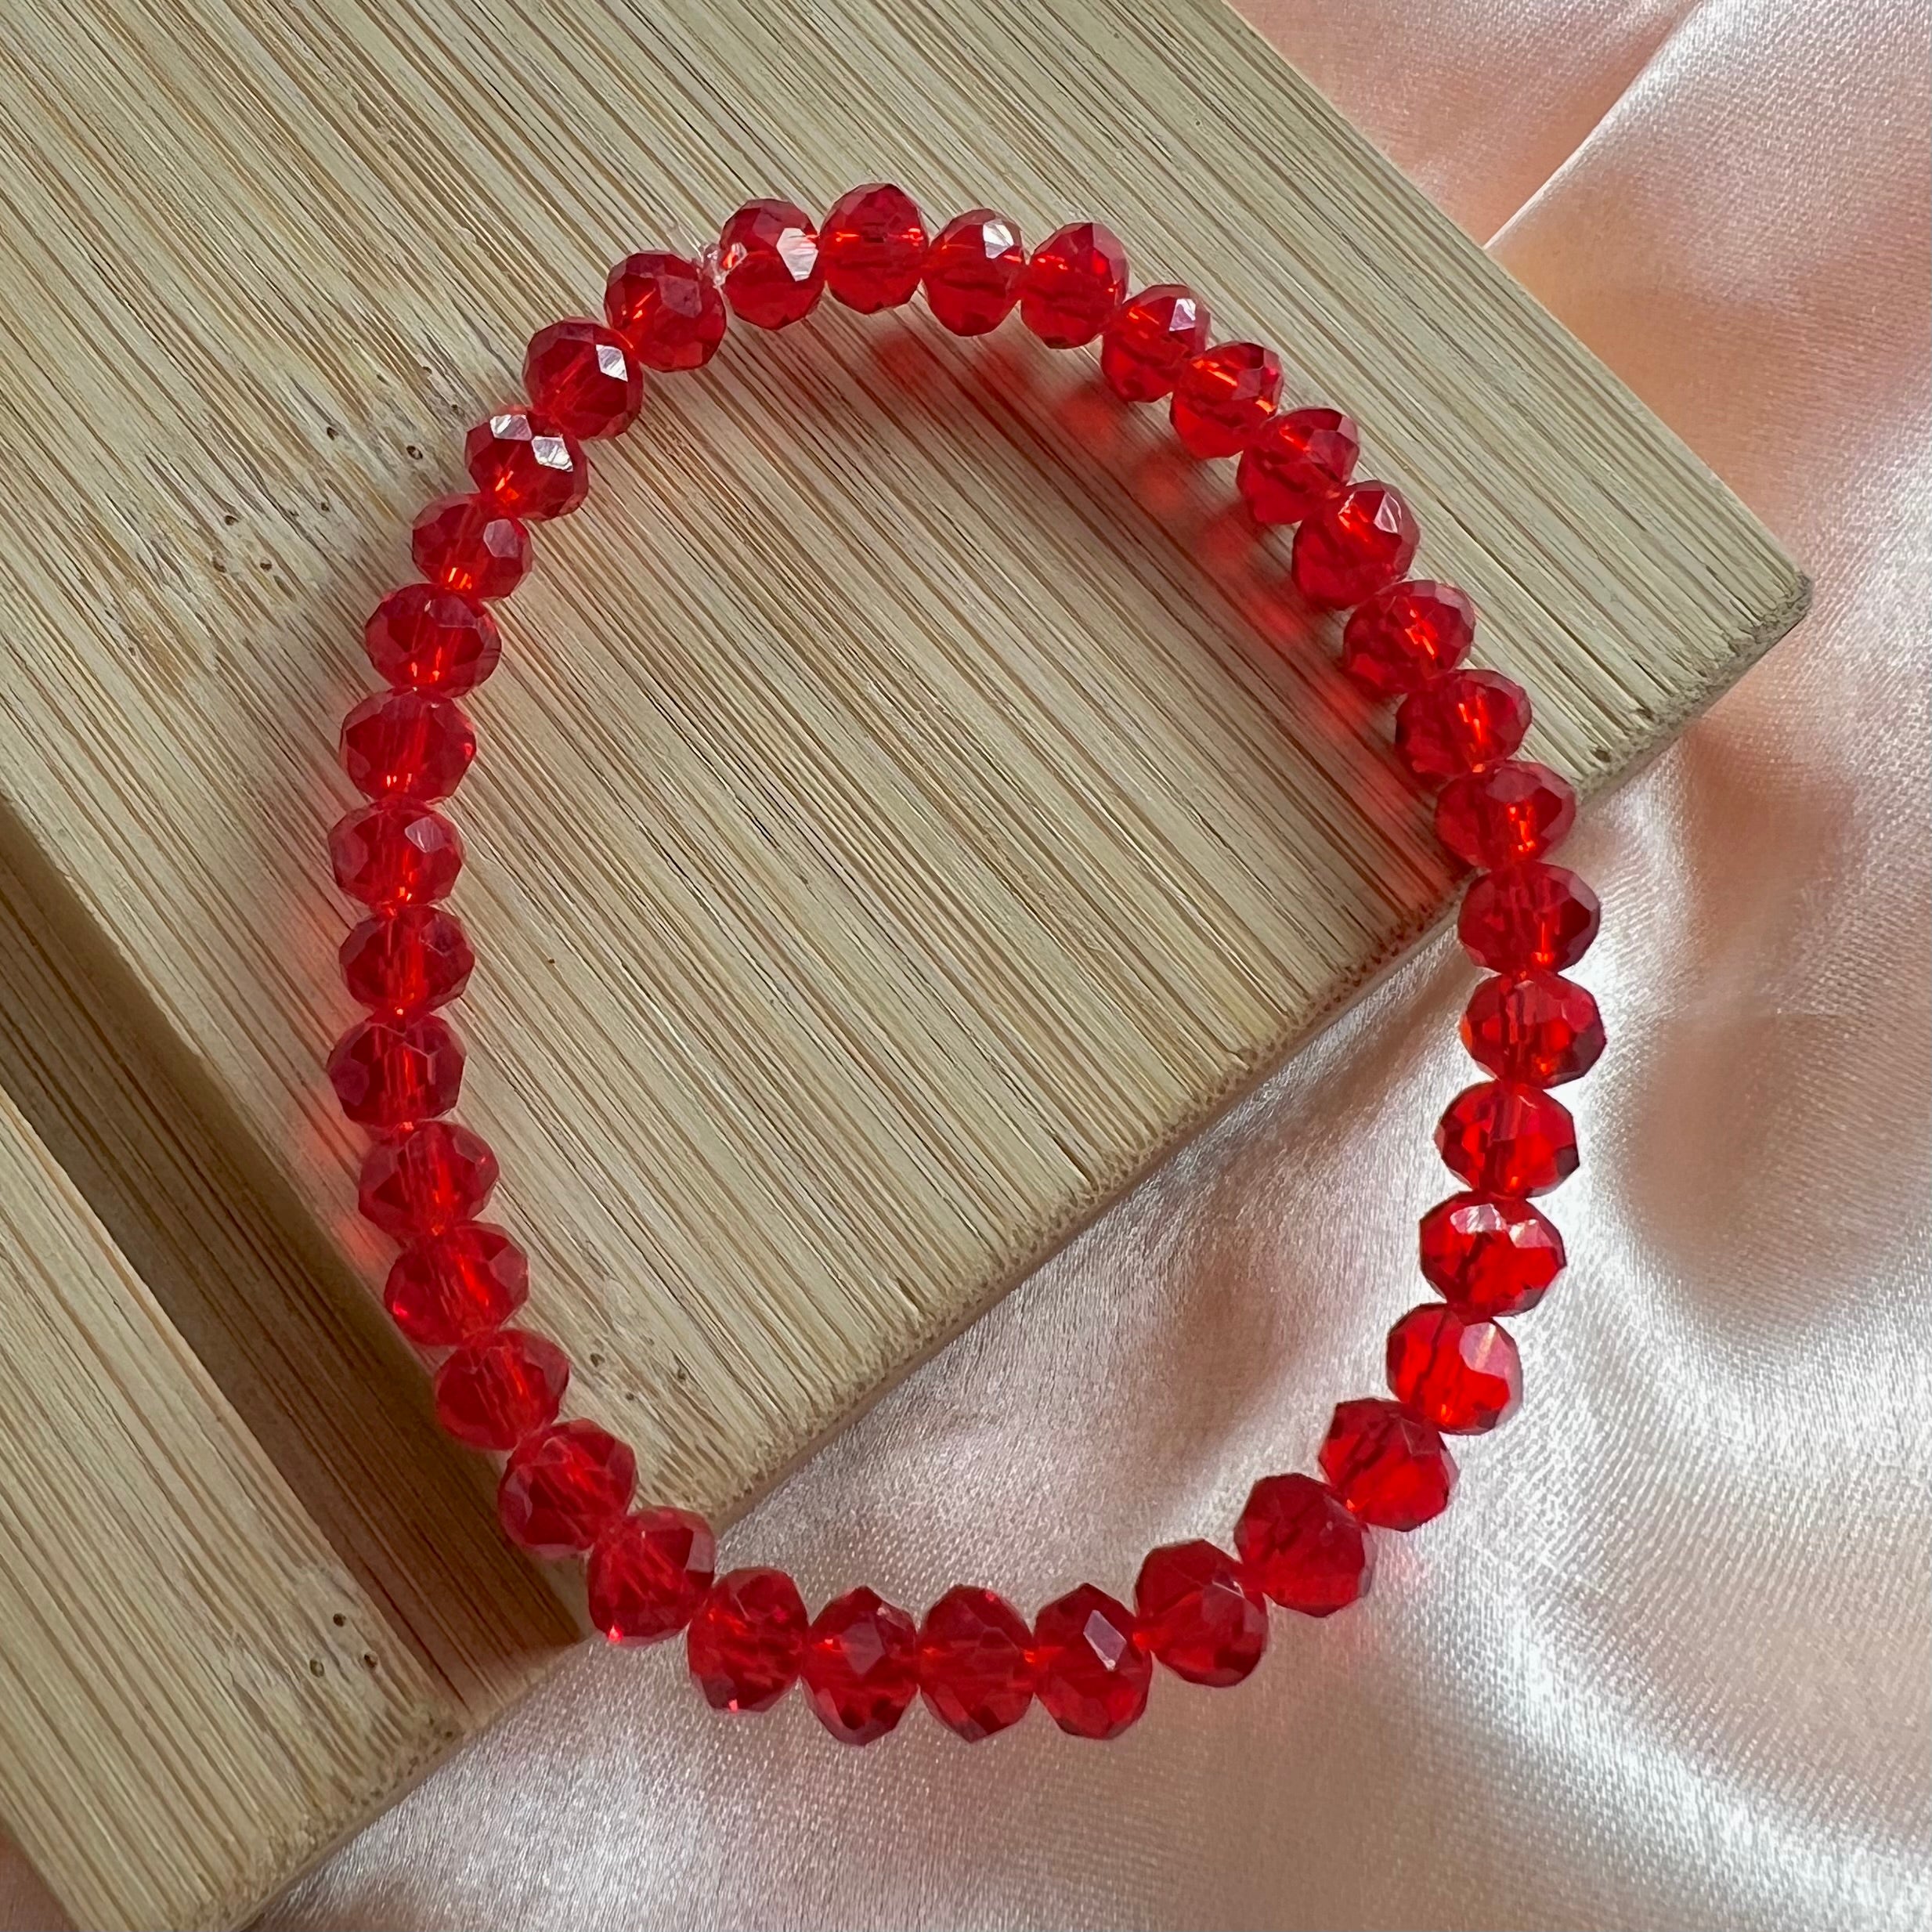 High Quality Natural Red Coral Beads Necklacechunky Coral  Etsy  Coral  beads Nature necklace Red coral